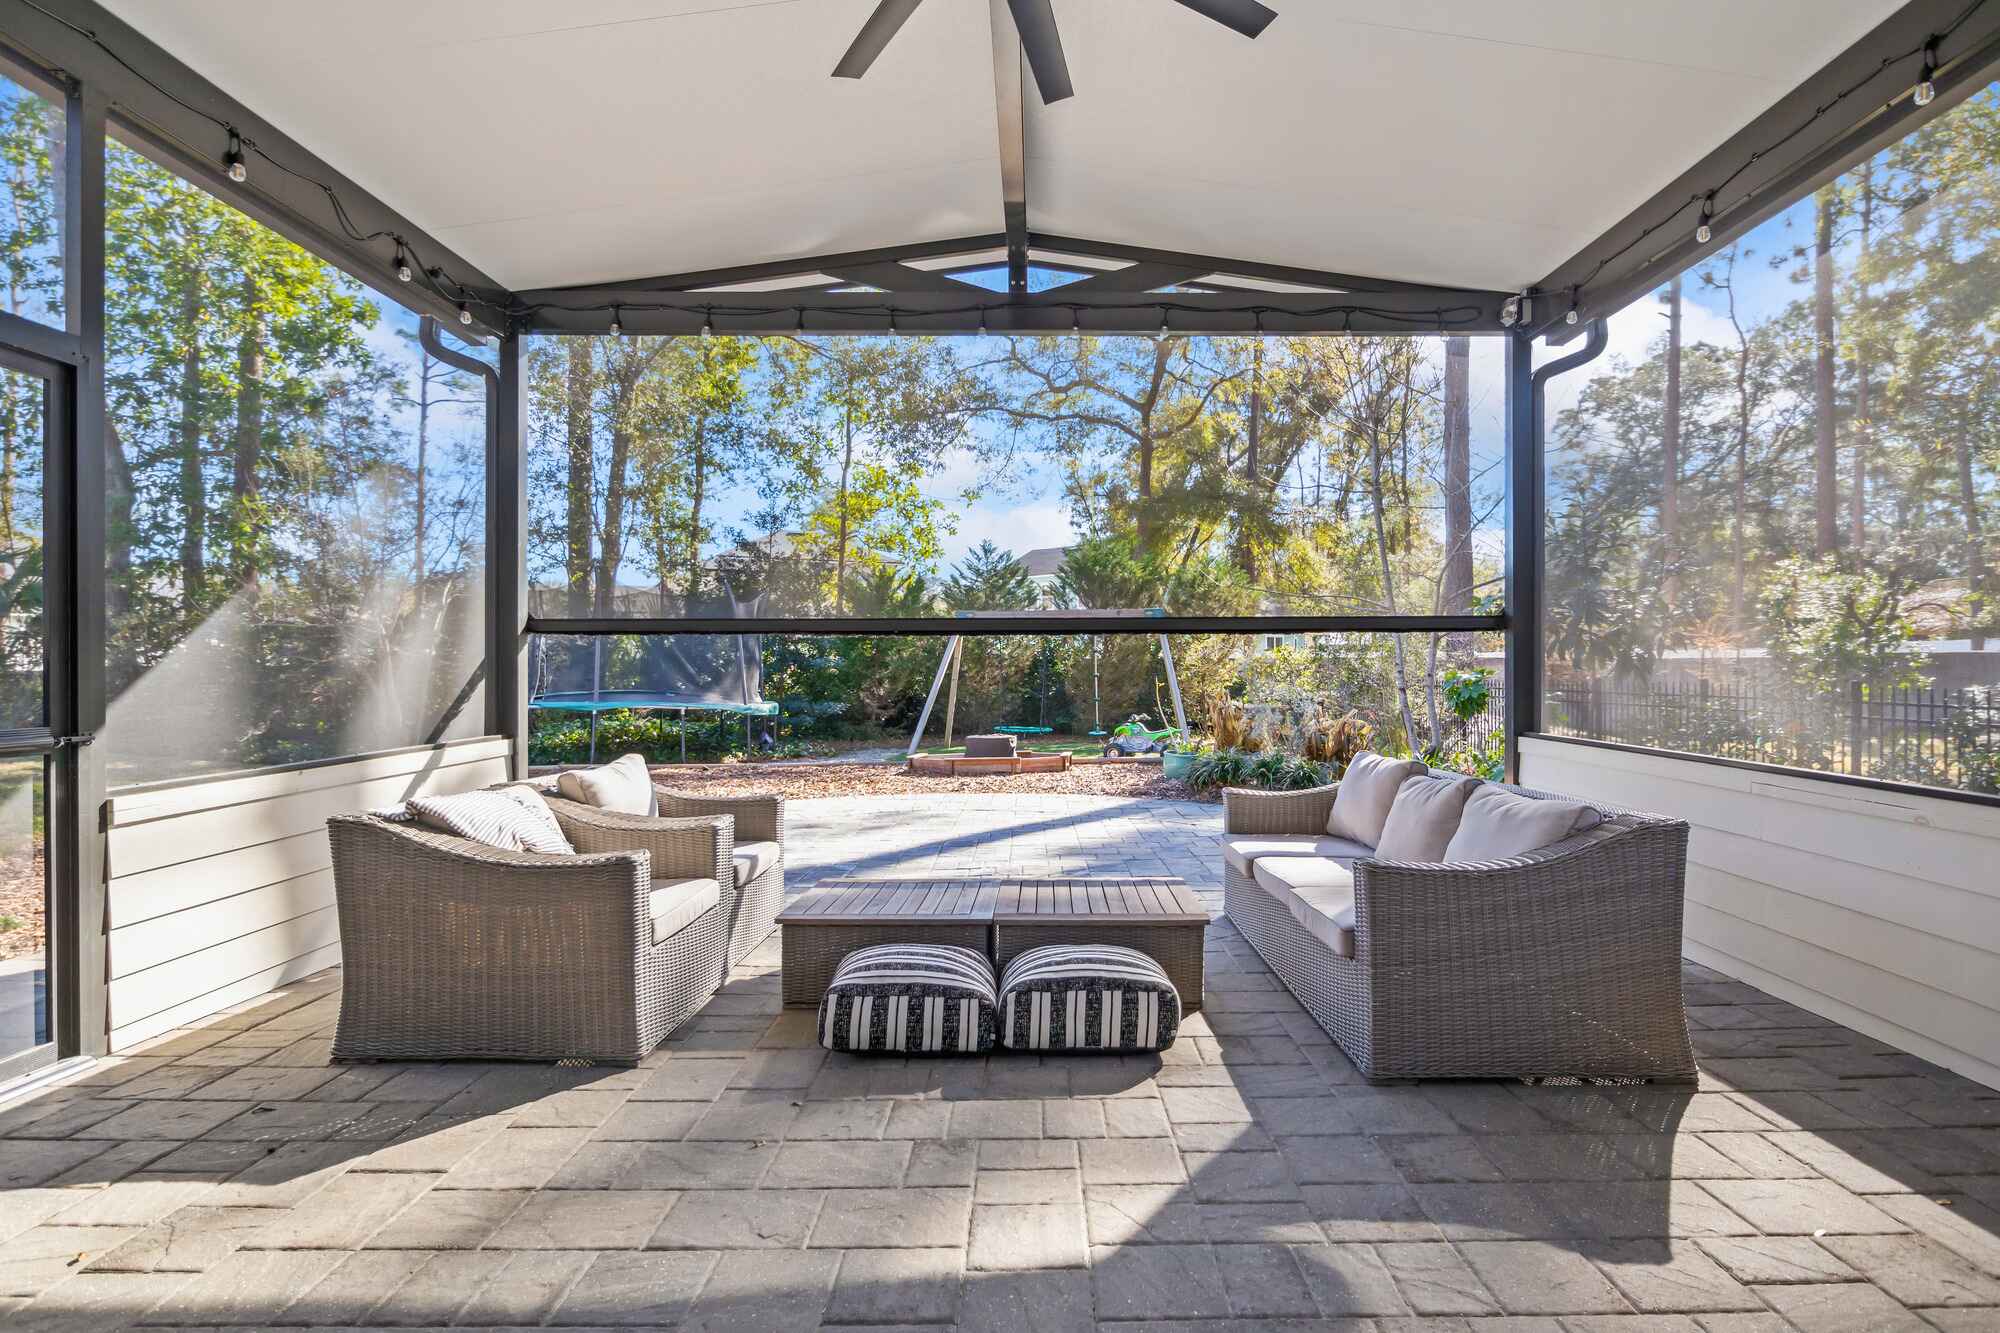 Northeast Florida Patio with Motorized Screen and Black Ceiling Fan